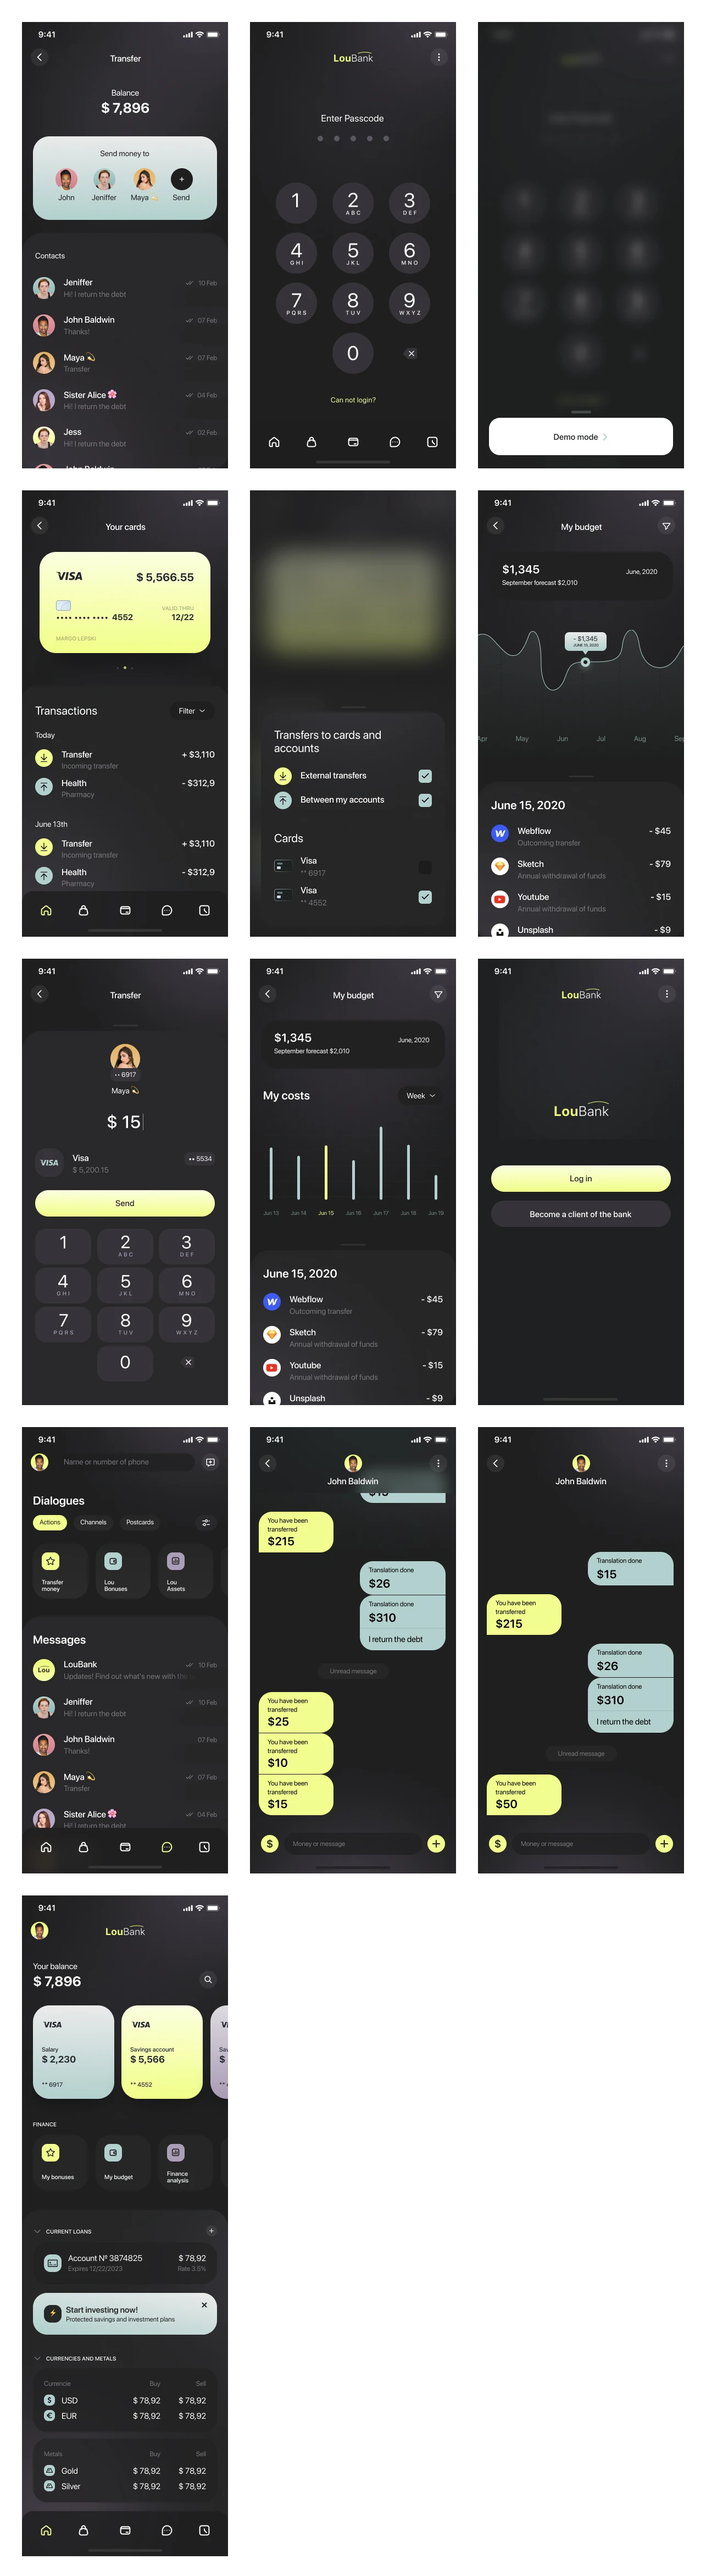 Banking App iOS Free UI Kit for Figma - This set of bank app includes 10+ beautiful screens and 15+ customizable elements for Figma. You can use it simply